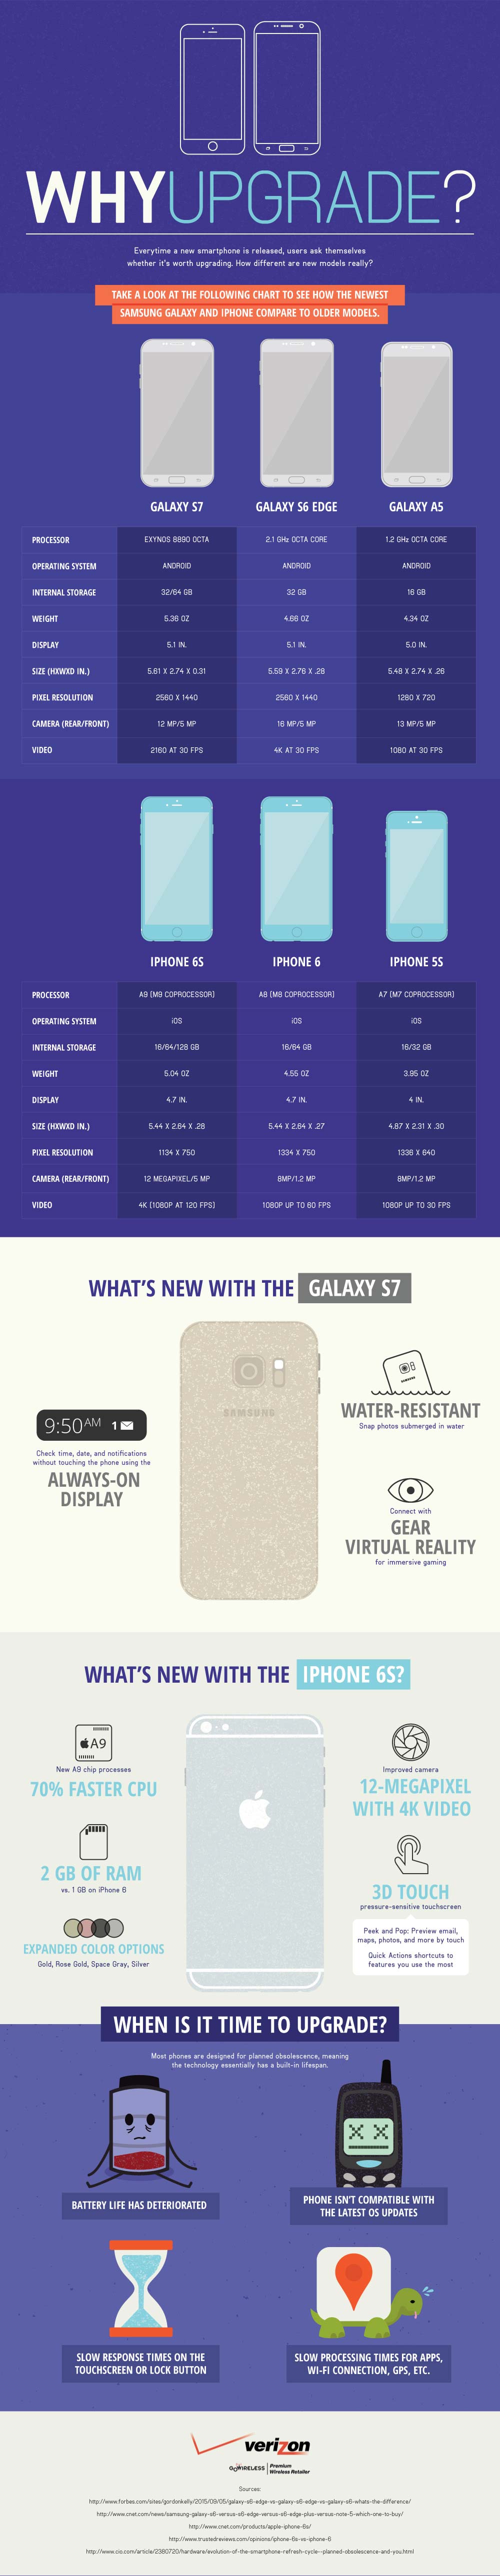 Why Upgrade? An iPhone and Samsung Galaxy Comparison